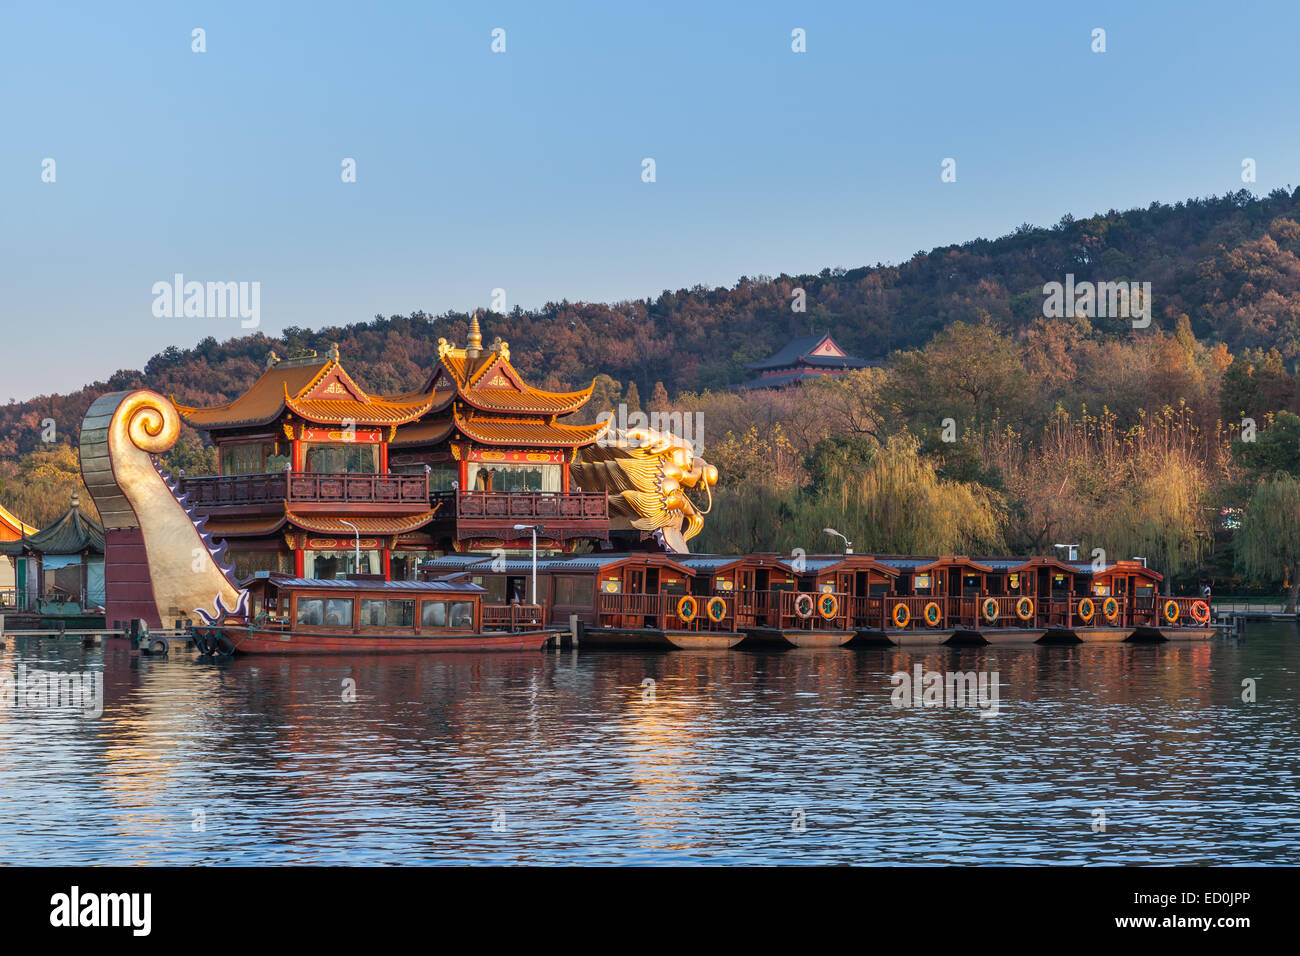 Hangzhou, China - December 5, 2014: Traditional Chinese wooden pleasure boats and Dragon ship stand on the West Lake. Famous par Stock Photo